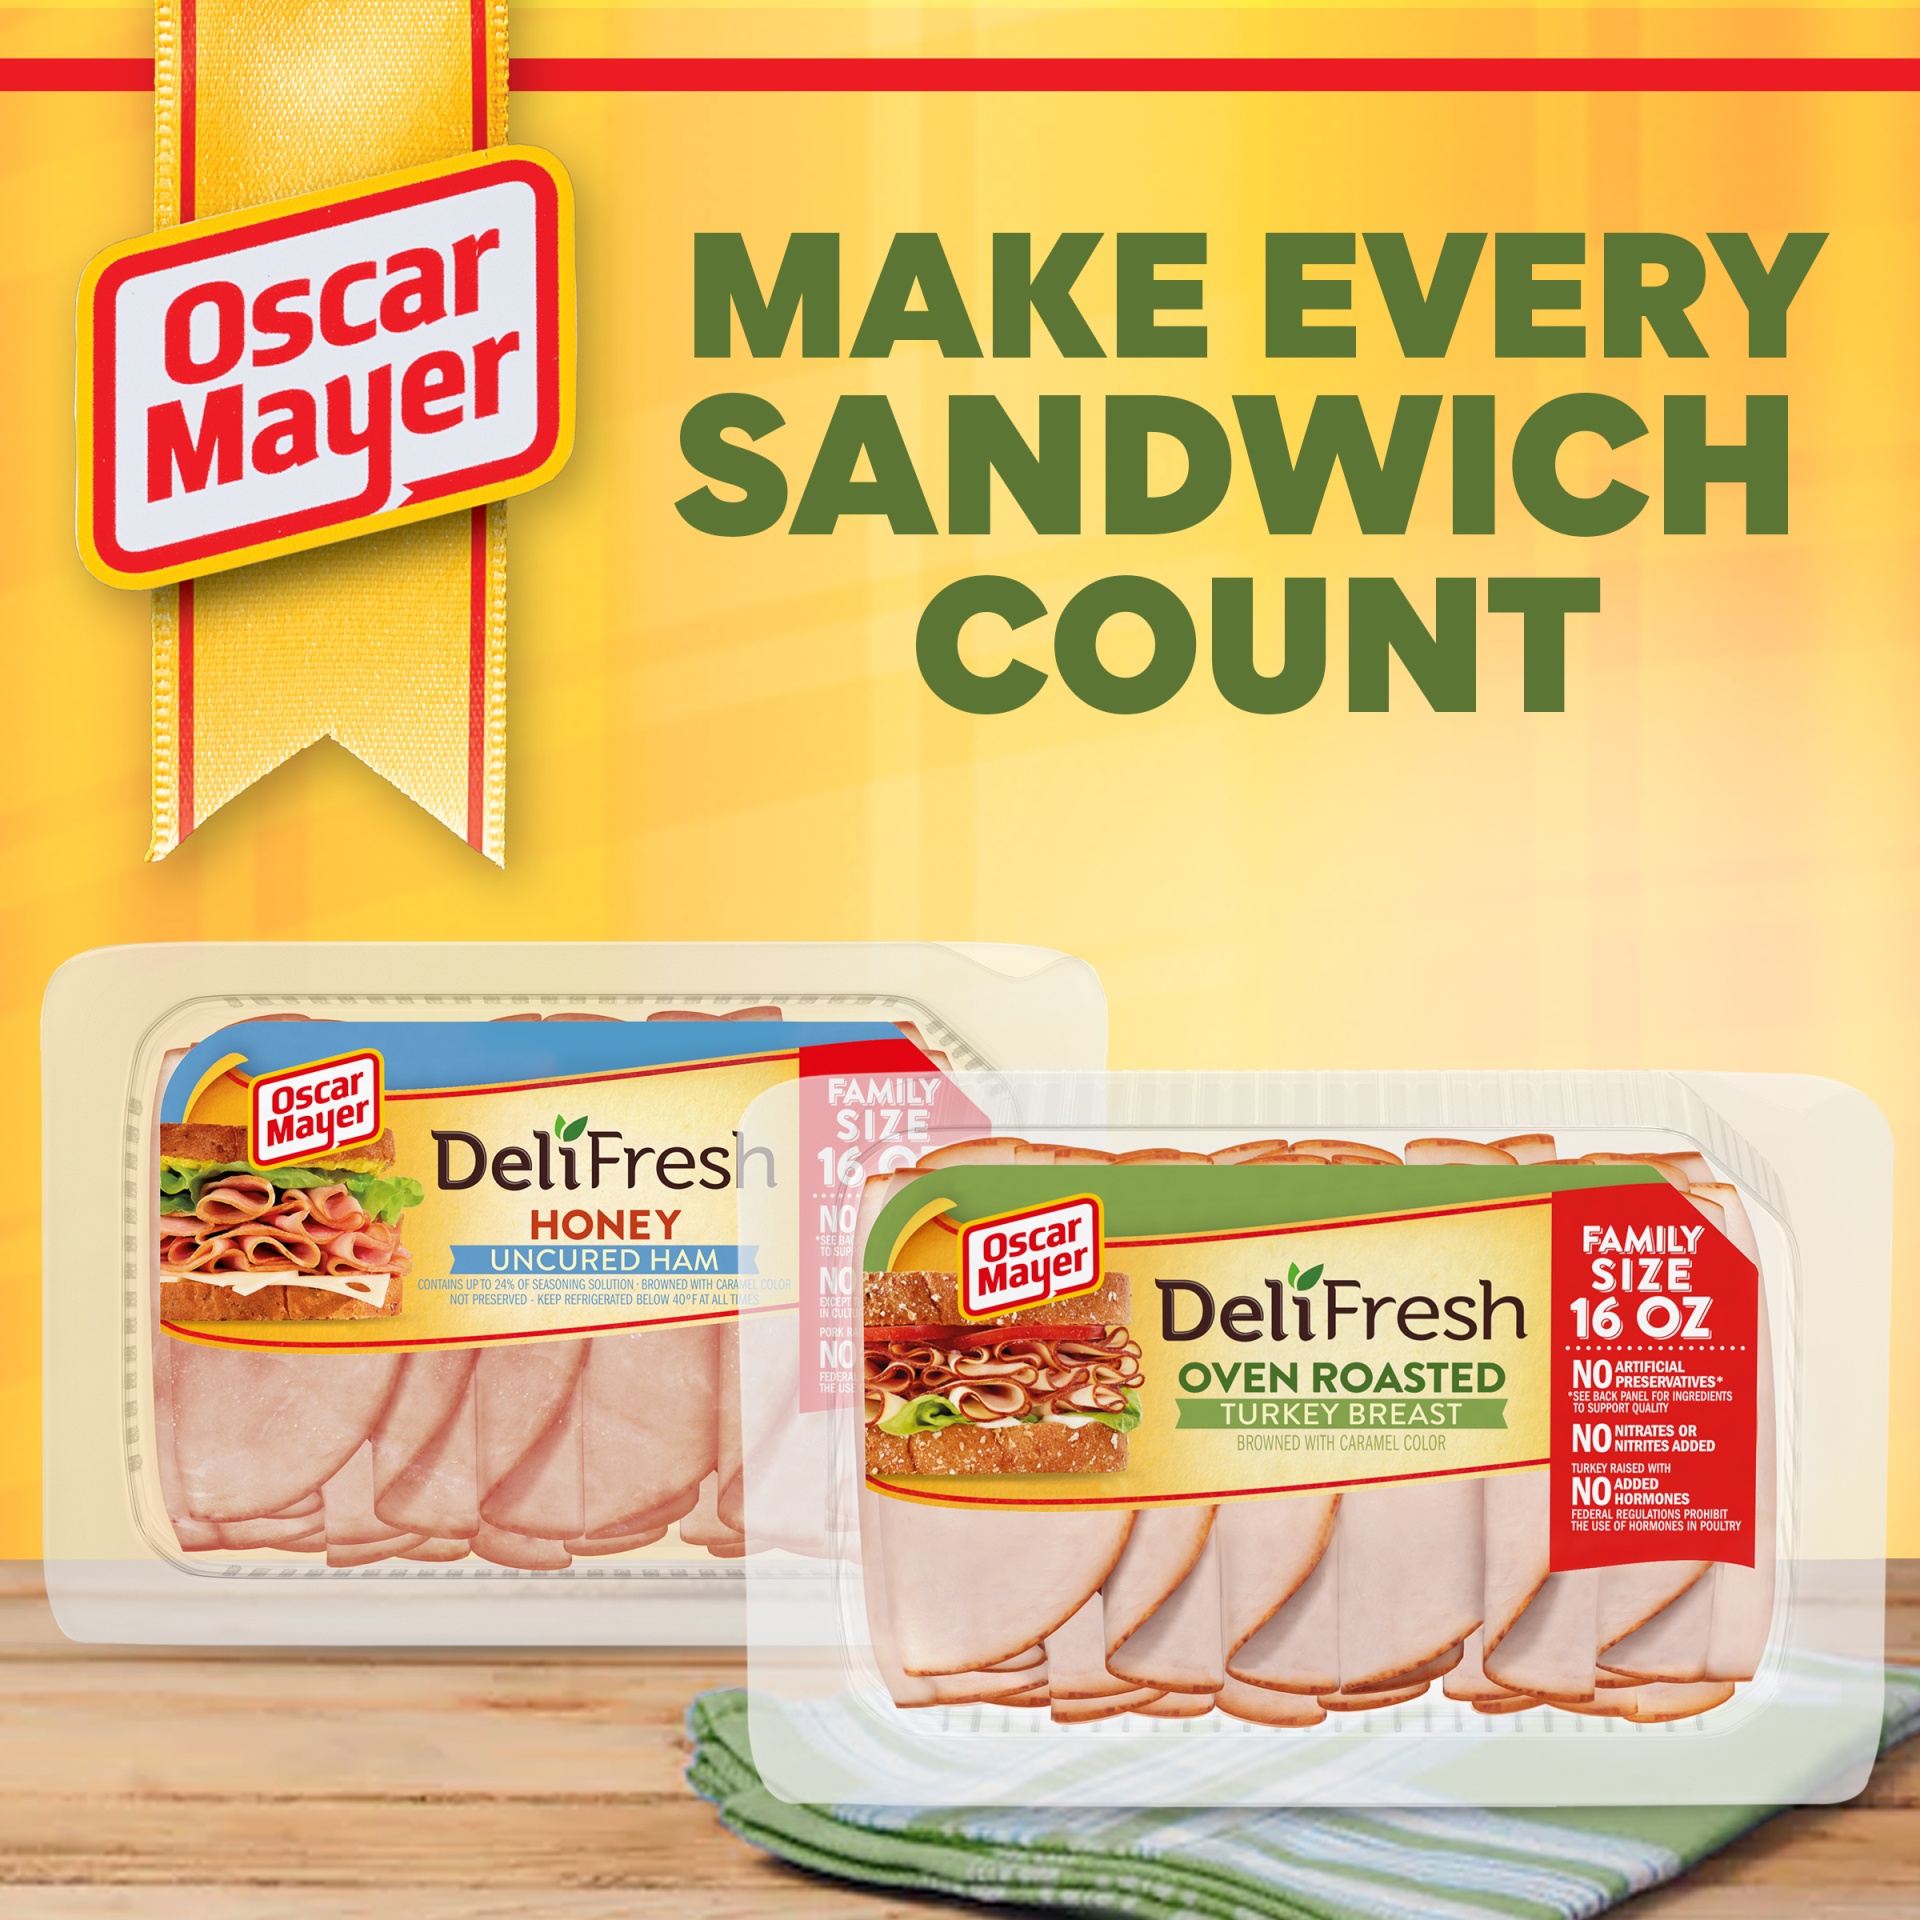 slide 5 of 13, Oscar Mayer Deli Fresh Oven Roasted Turkey Breast Sliced Lunch Meat Family Size Tray, 16 oz